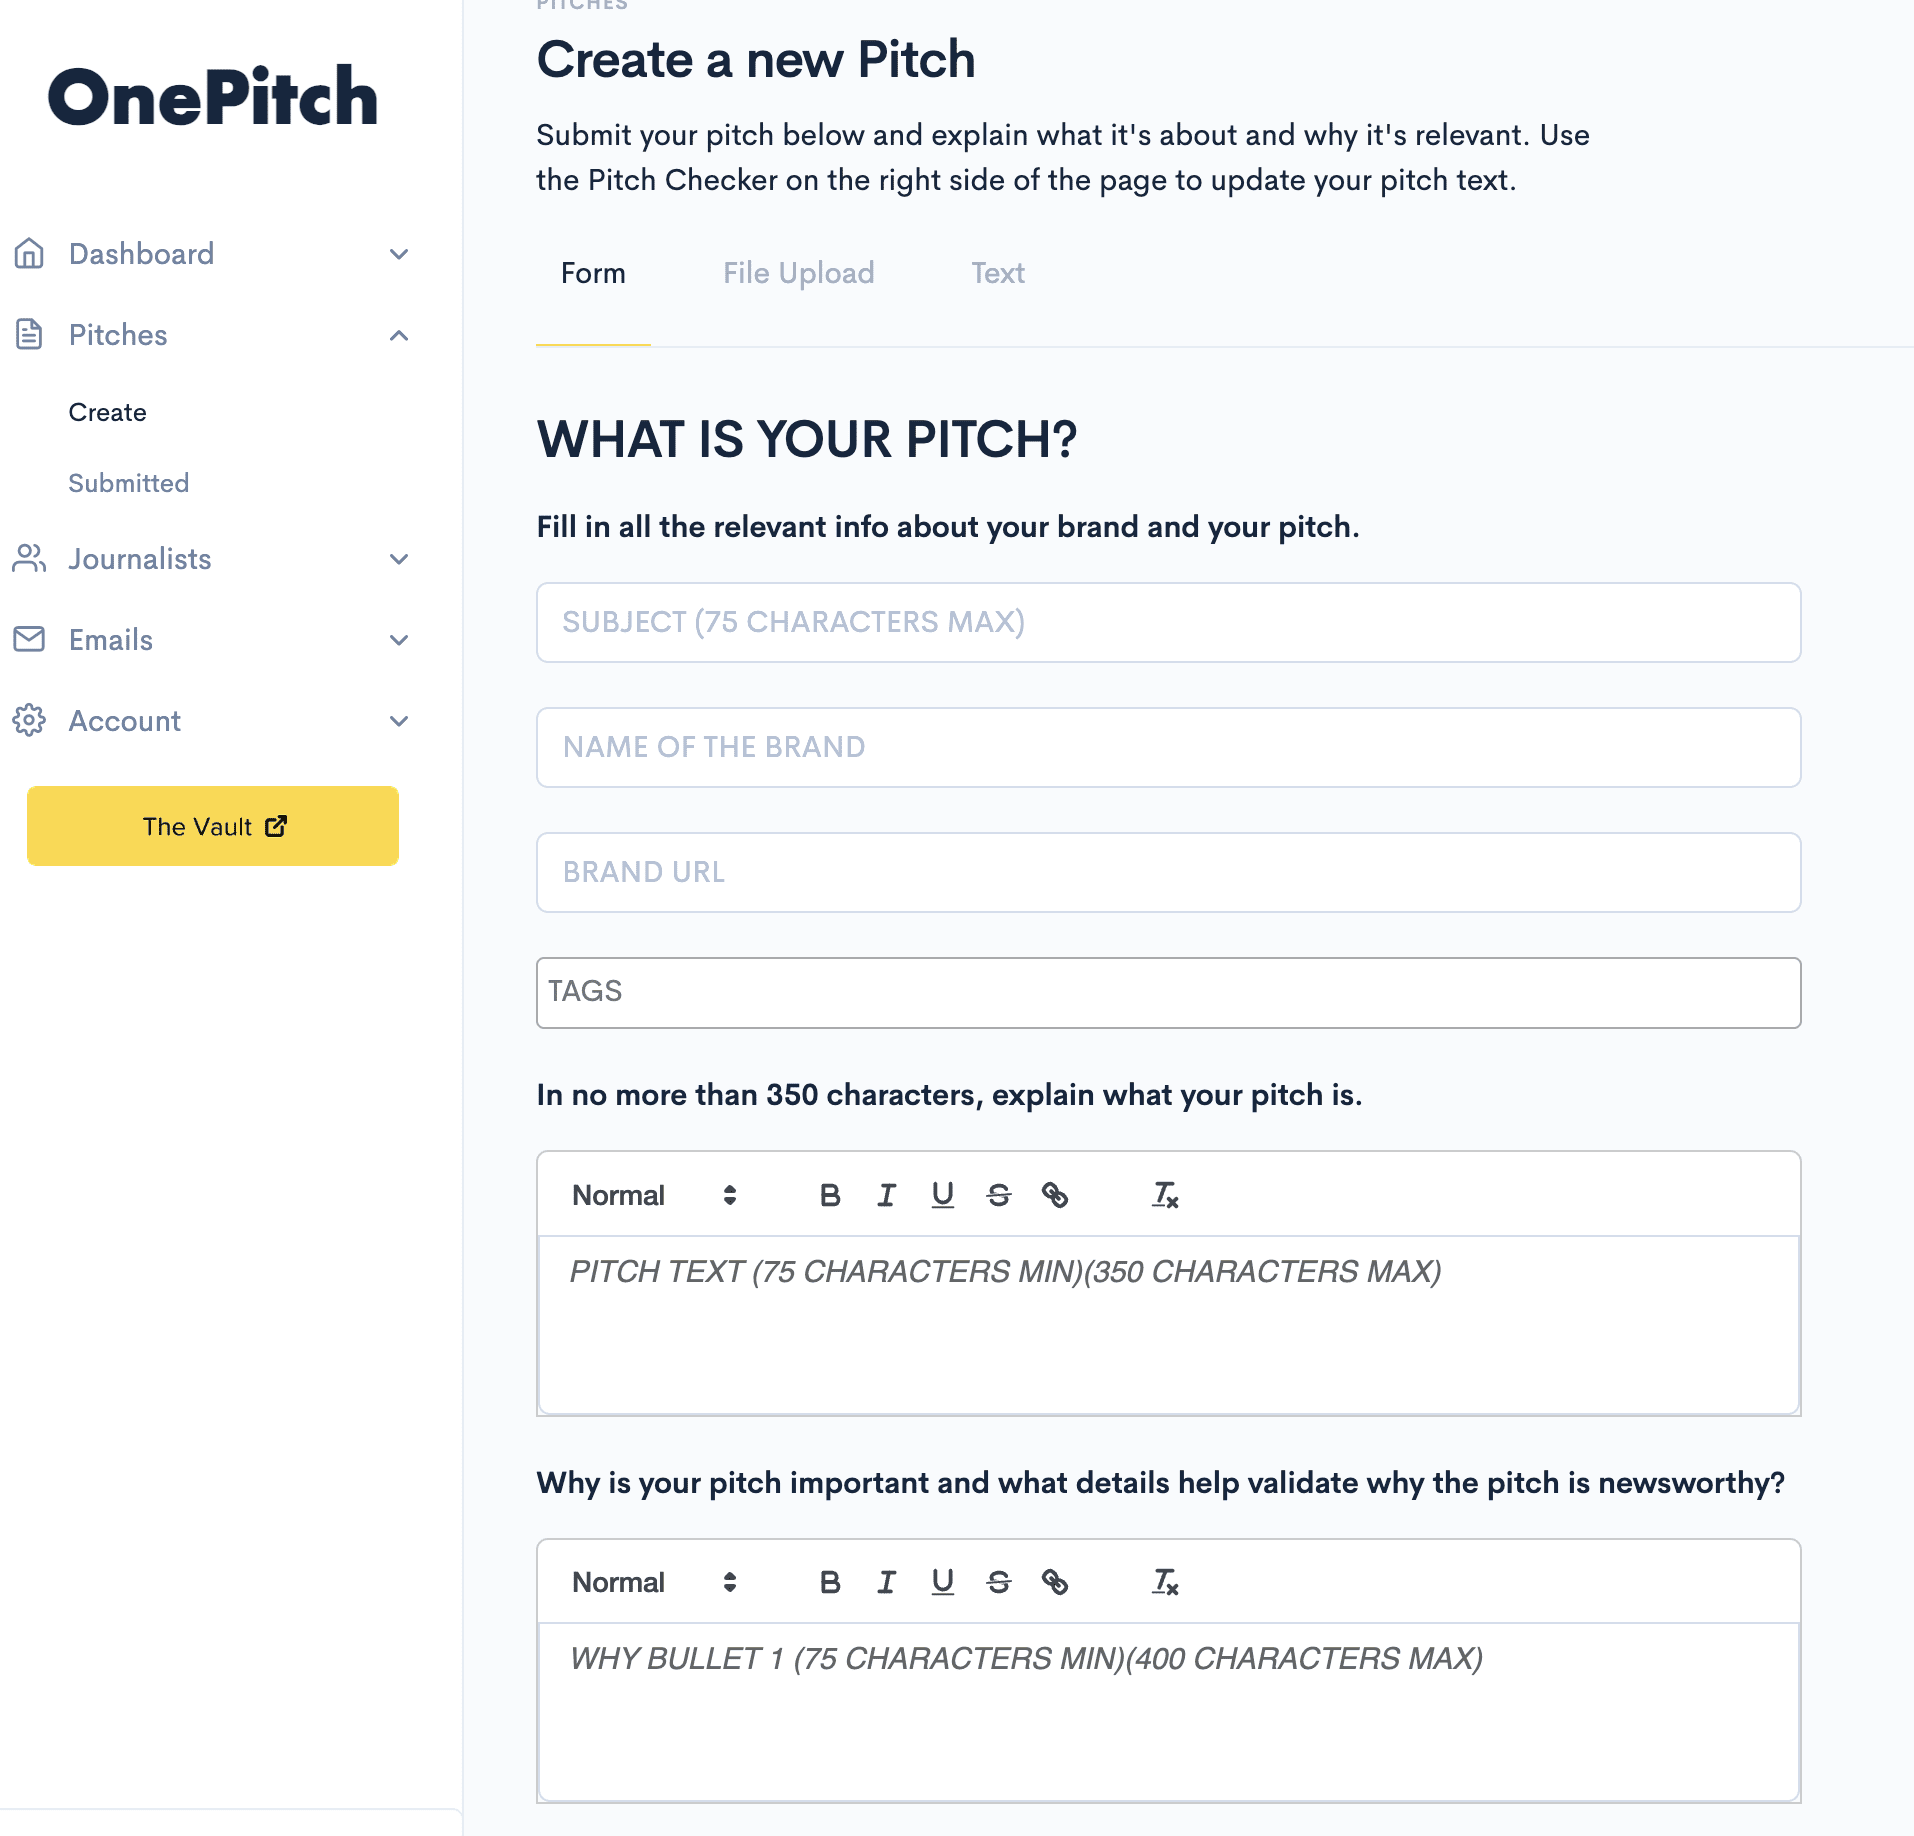 OnePitch pitch upload